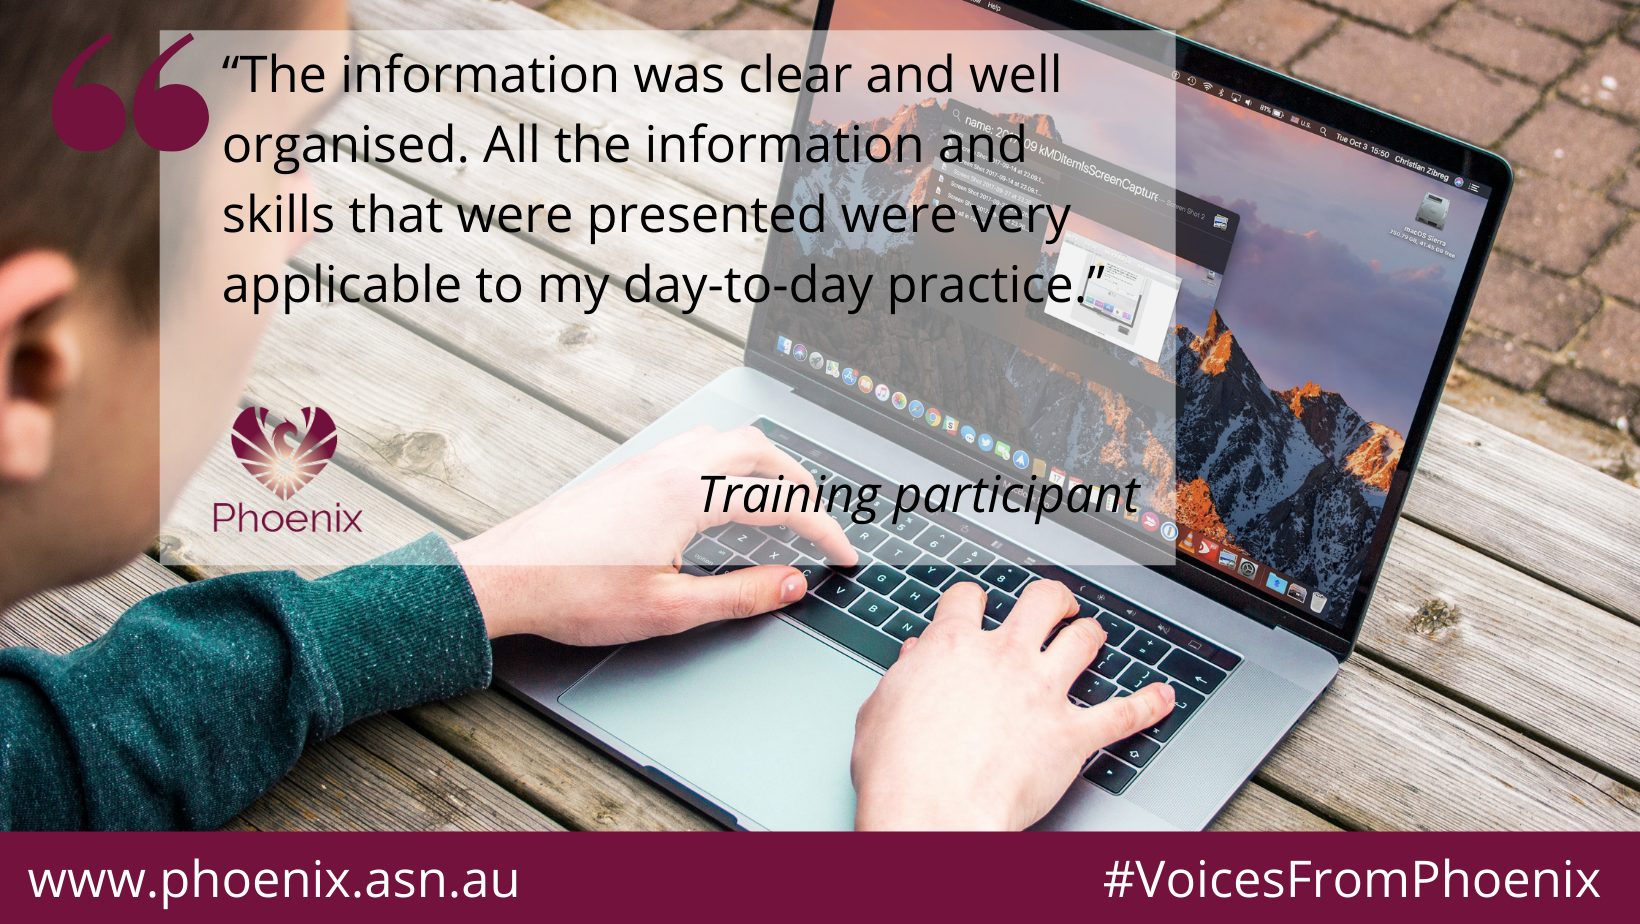 A picture with text overset. The quote is from a training participant that reads:“The information was clear and well organised. All the information and skills that were presented were very applicable to my day-to-day practice.” Training participant